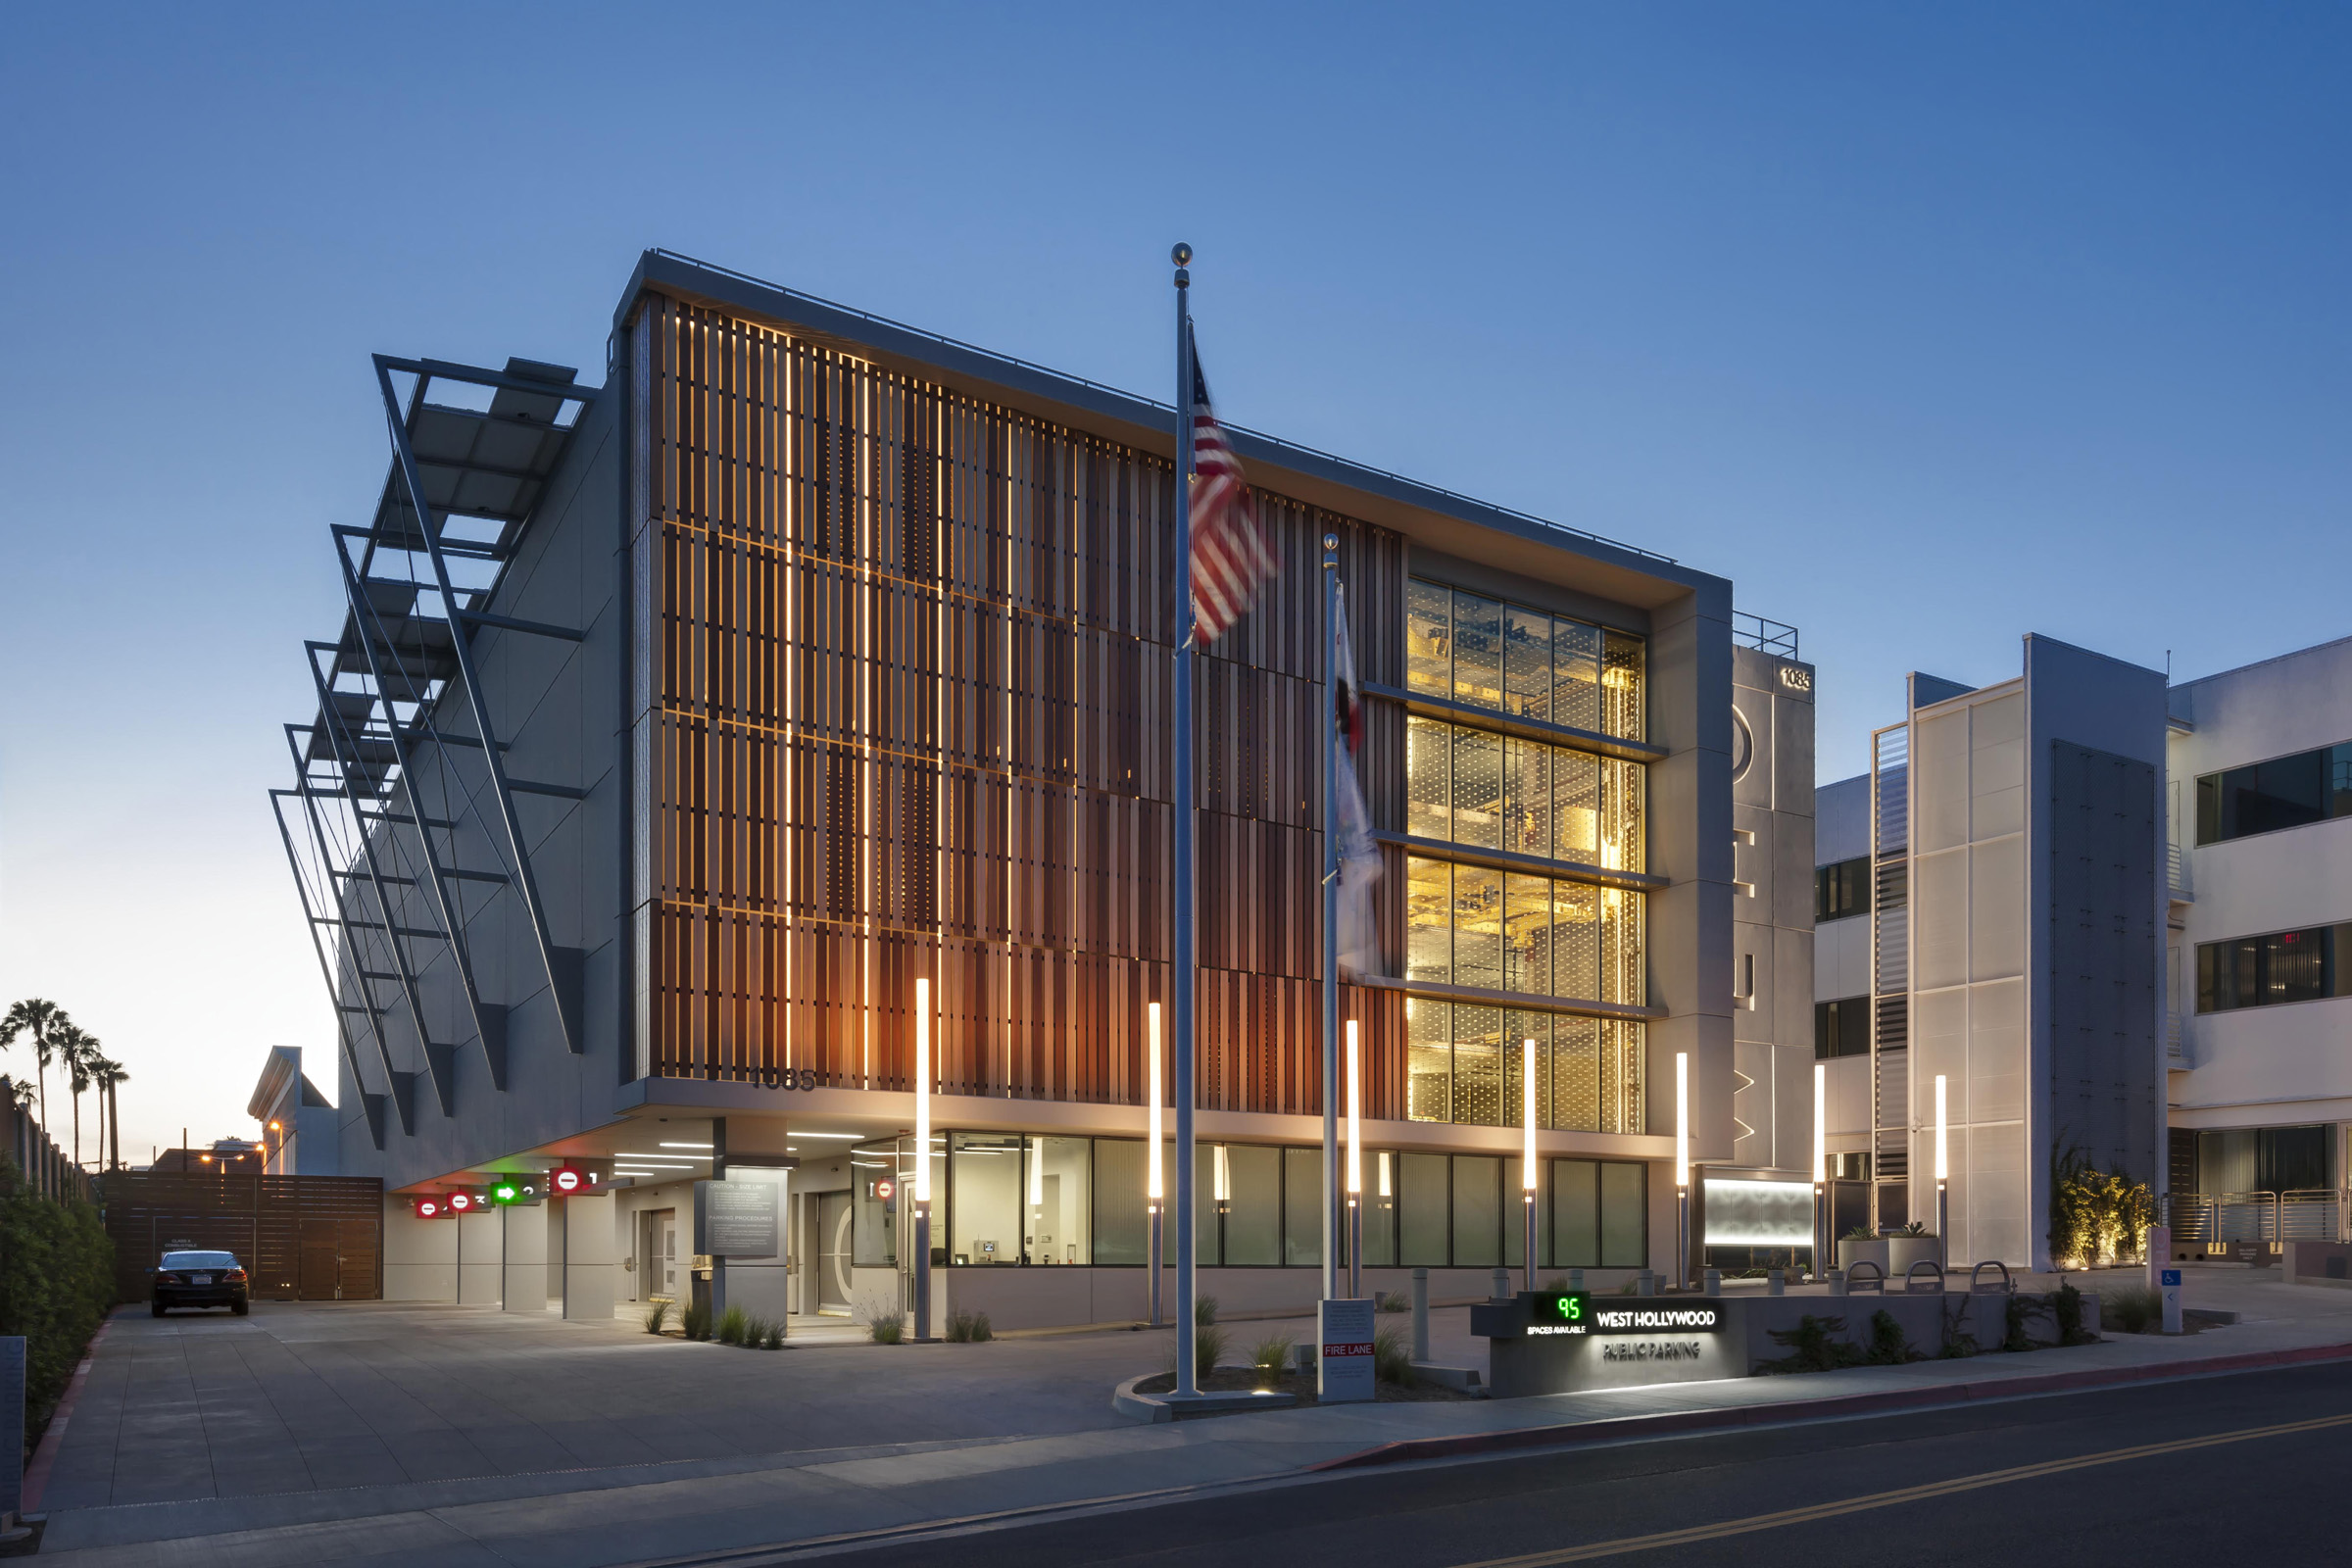 The fully-automated parking garage in West Hollywood, California is the first of its kind on the West Coast for a municipality.